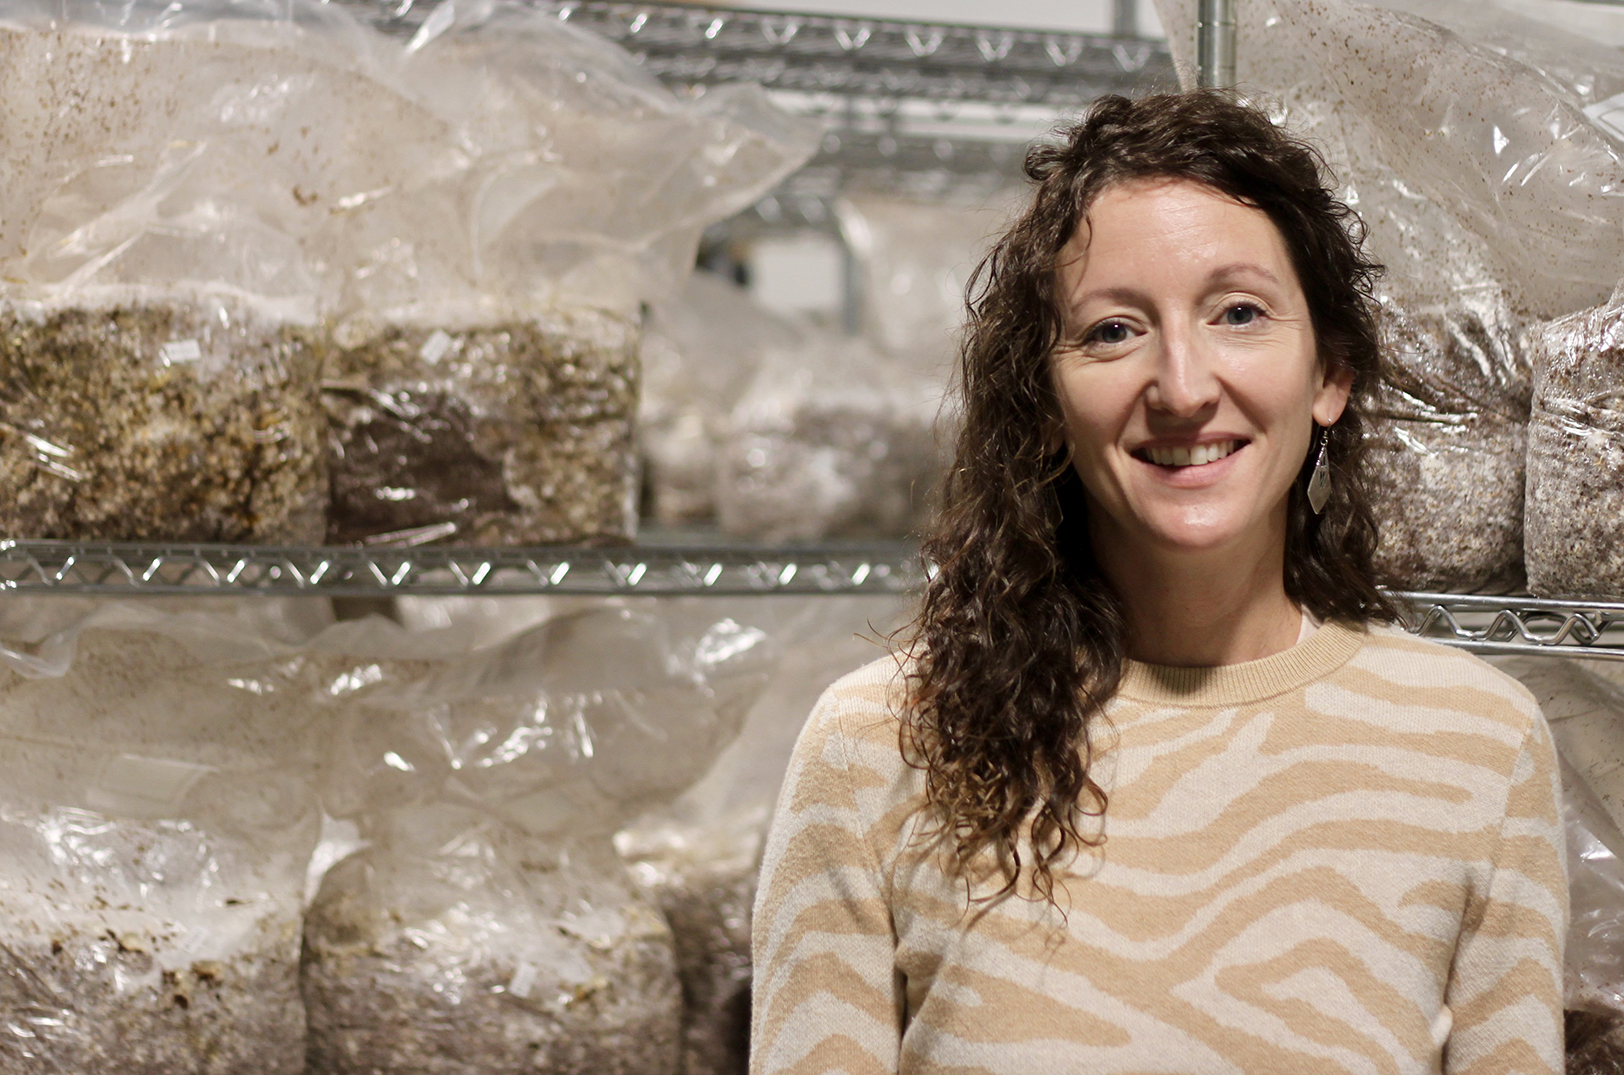 Mushroom lover finds the perfect spot to hunt: Her own warehouse in North Kansas City